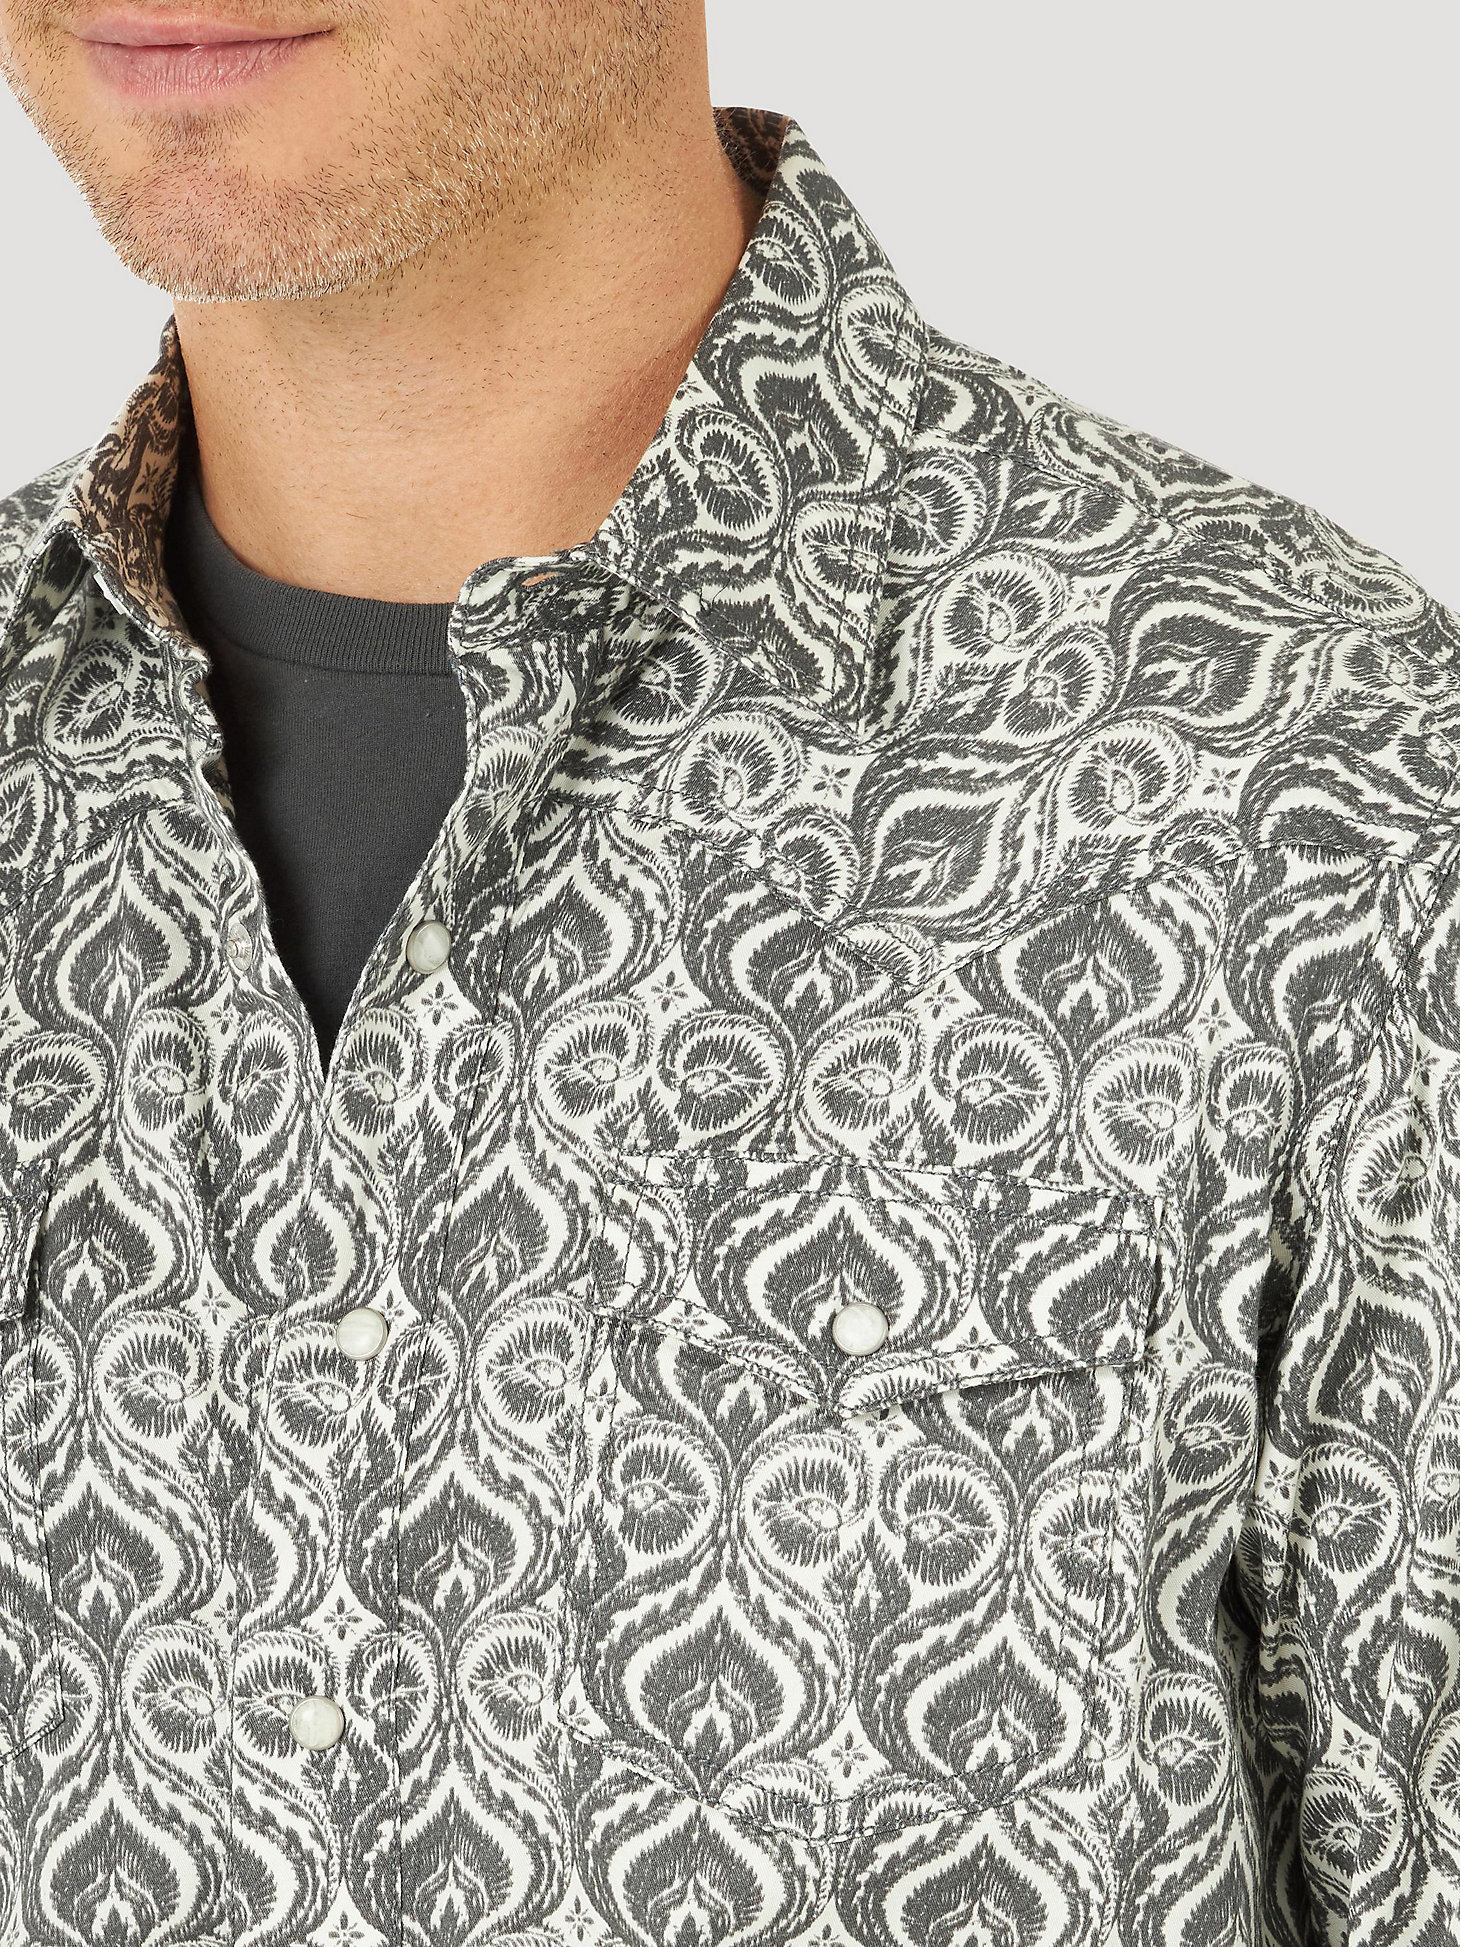 Men's Wrangler Retro® Long Sleeve Western Snap Printed Shirt in Grey Feathers alternative view 2